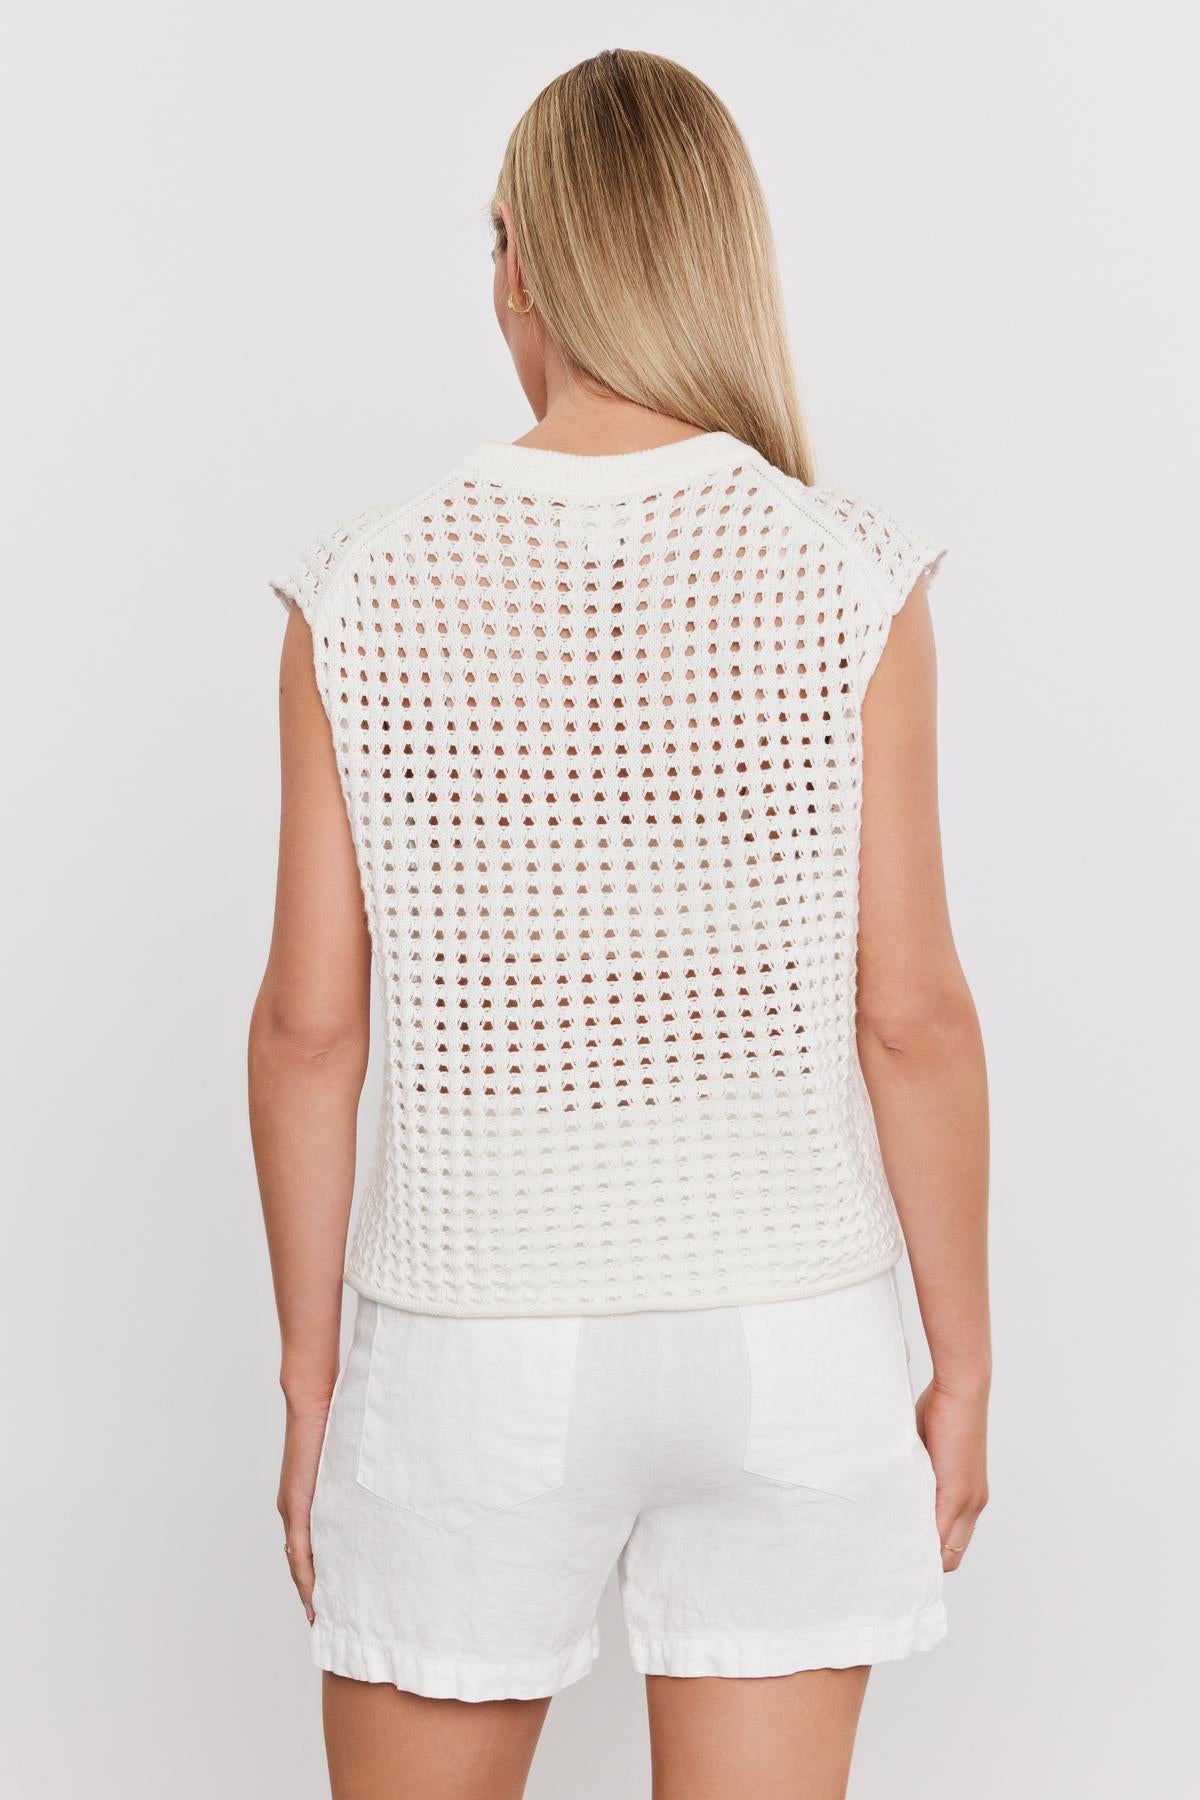   Person with long blond hair, wearing a white, sleeveless, crocheted top and white shorts, standing with their back facing the camera against a plain white background, presenting a cropped silhouette ideal for showcasing Velvet by Graham & Spencer's MAISON SWEATER in lightweight cotton cashmere. 